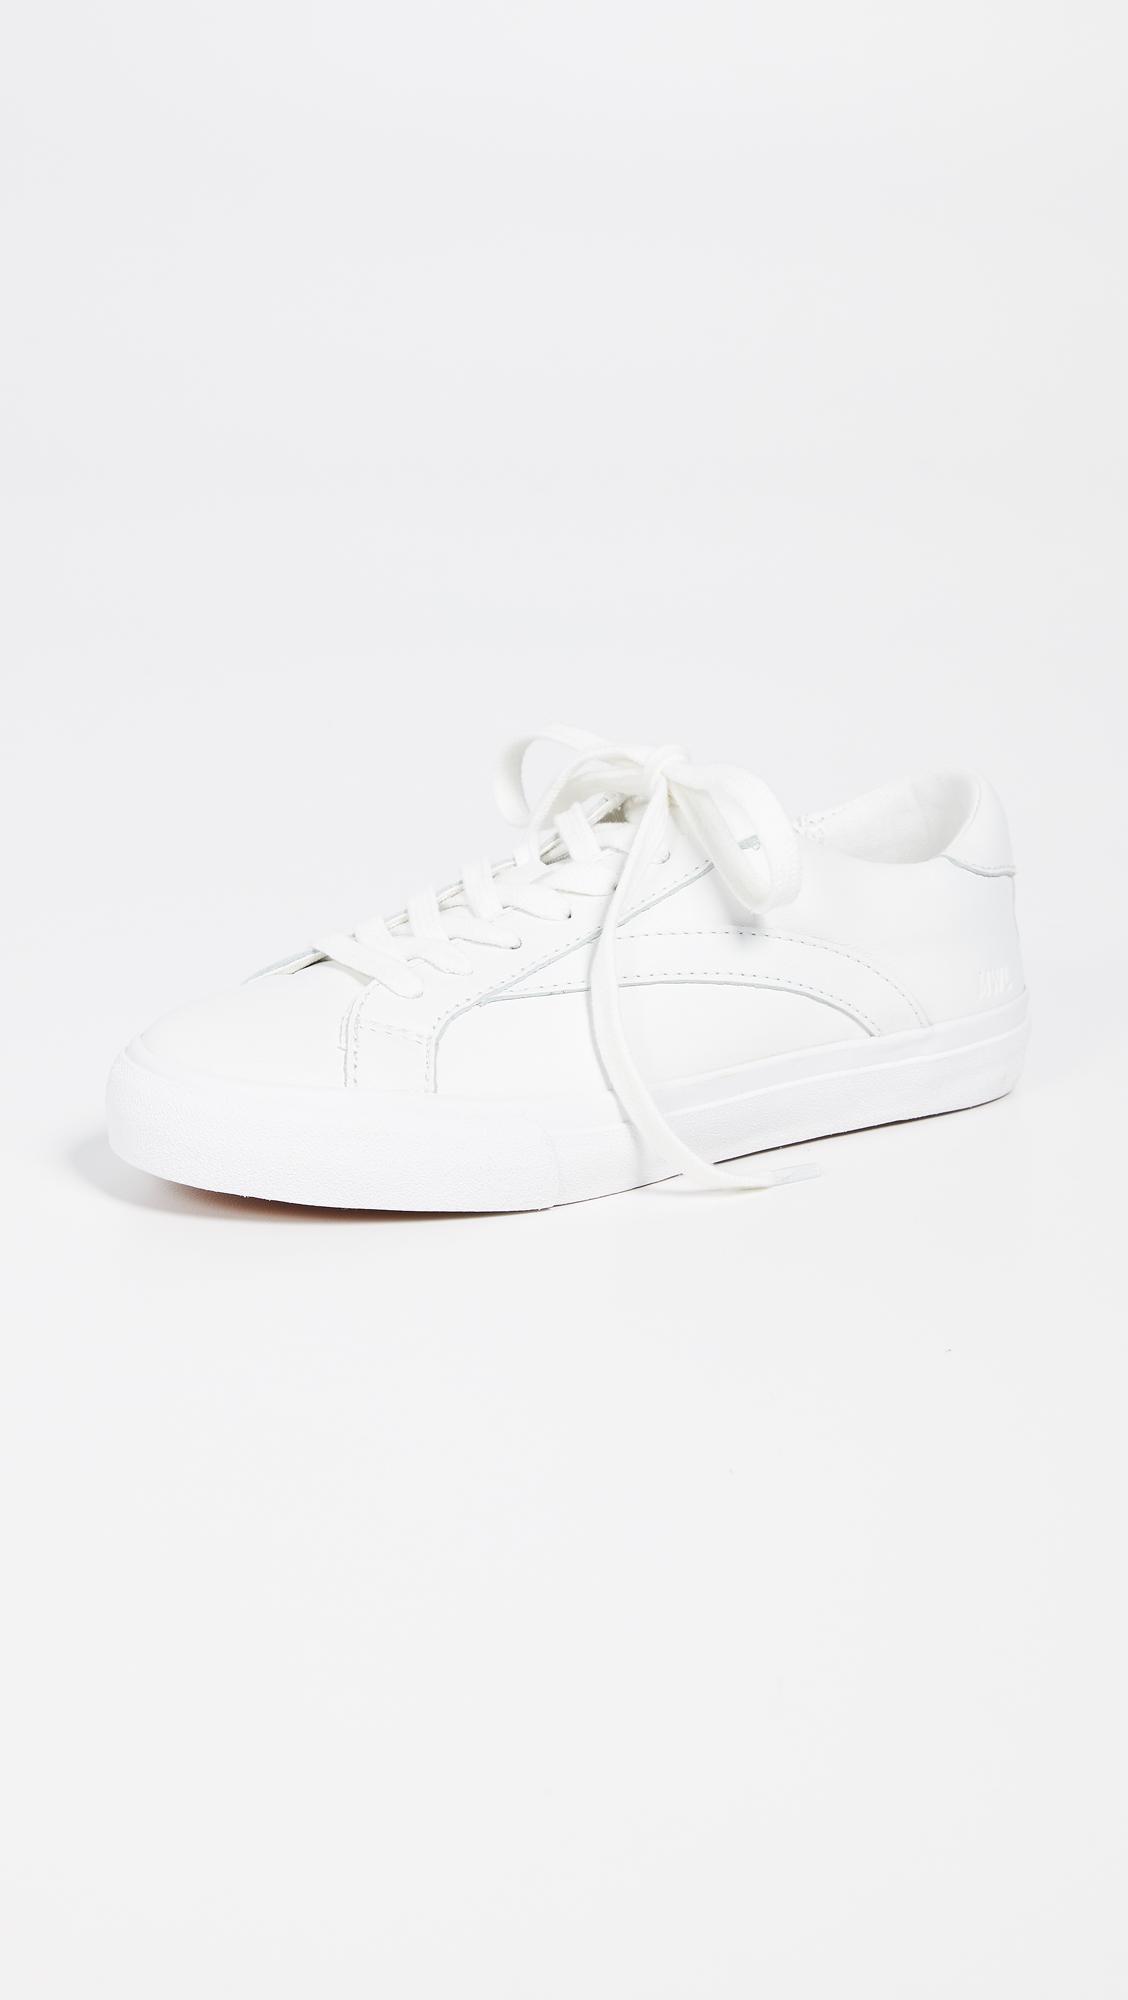 Madewell Leather Sidewalk Lowtop Sneakers in Pale Parchment (White) Lyst